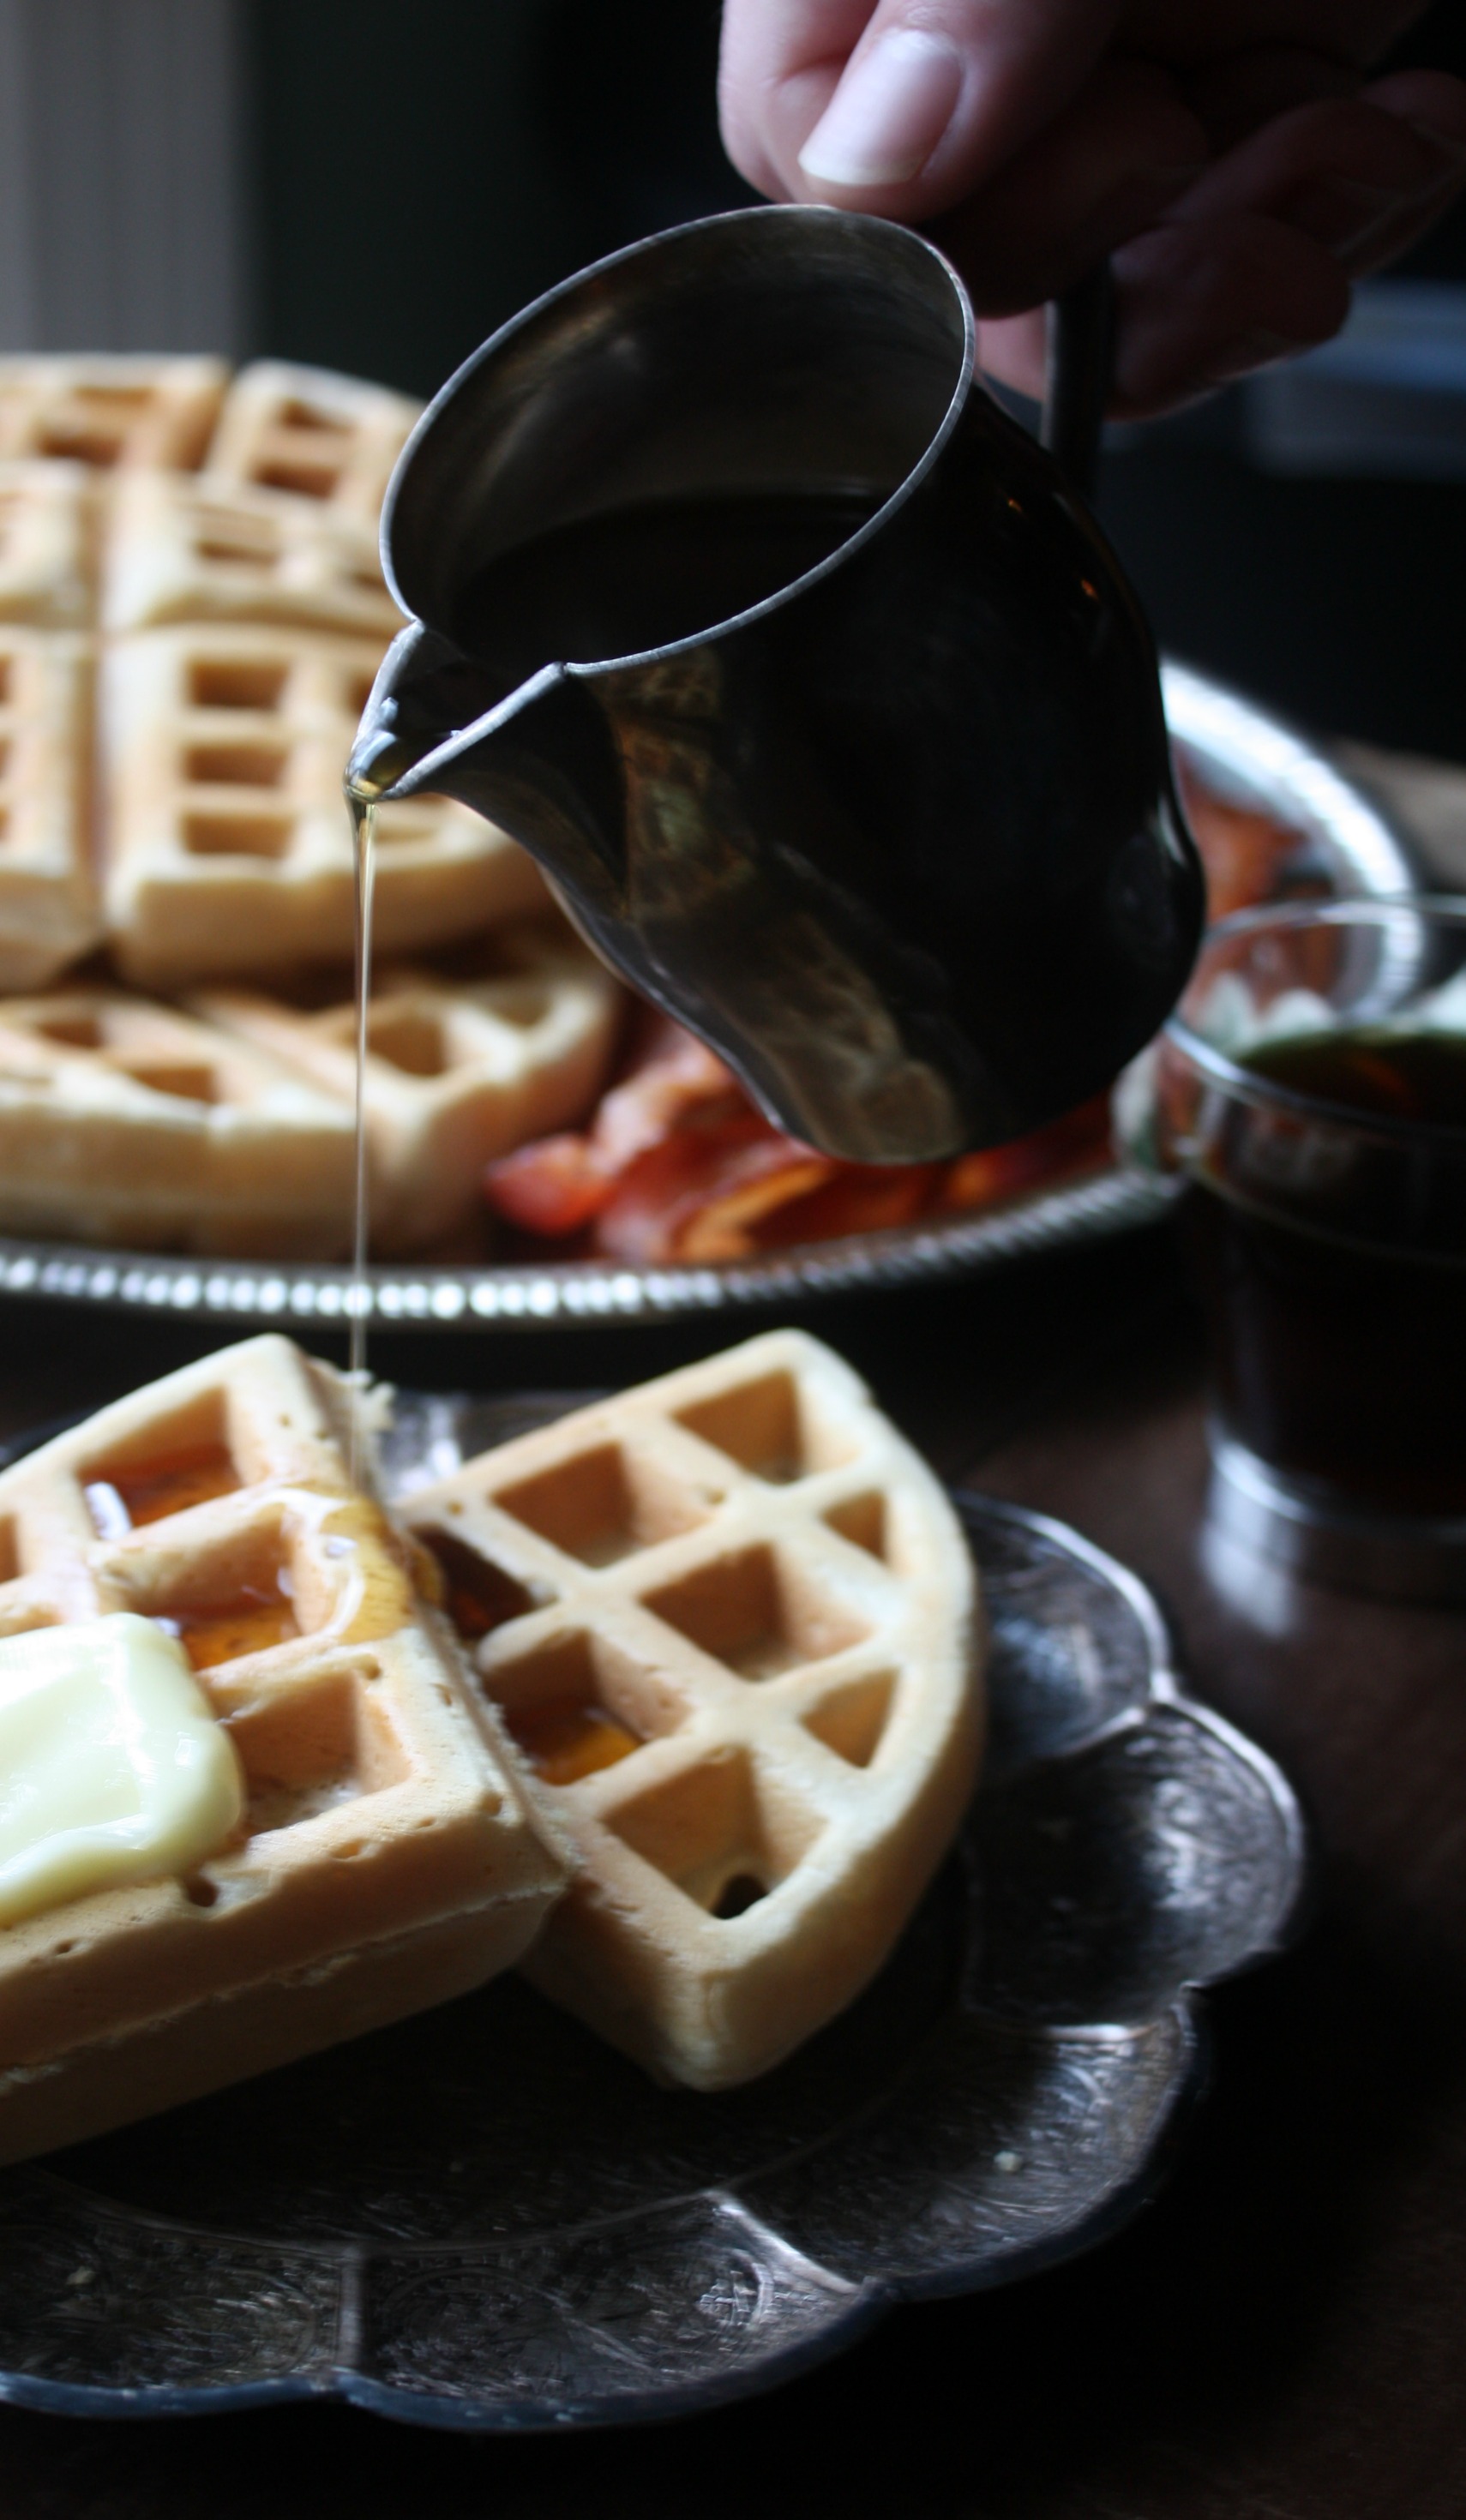 This is our family's fluffy and delicious waffles from scratch recipe.